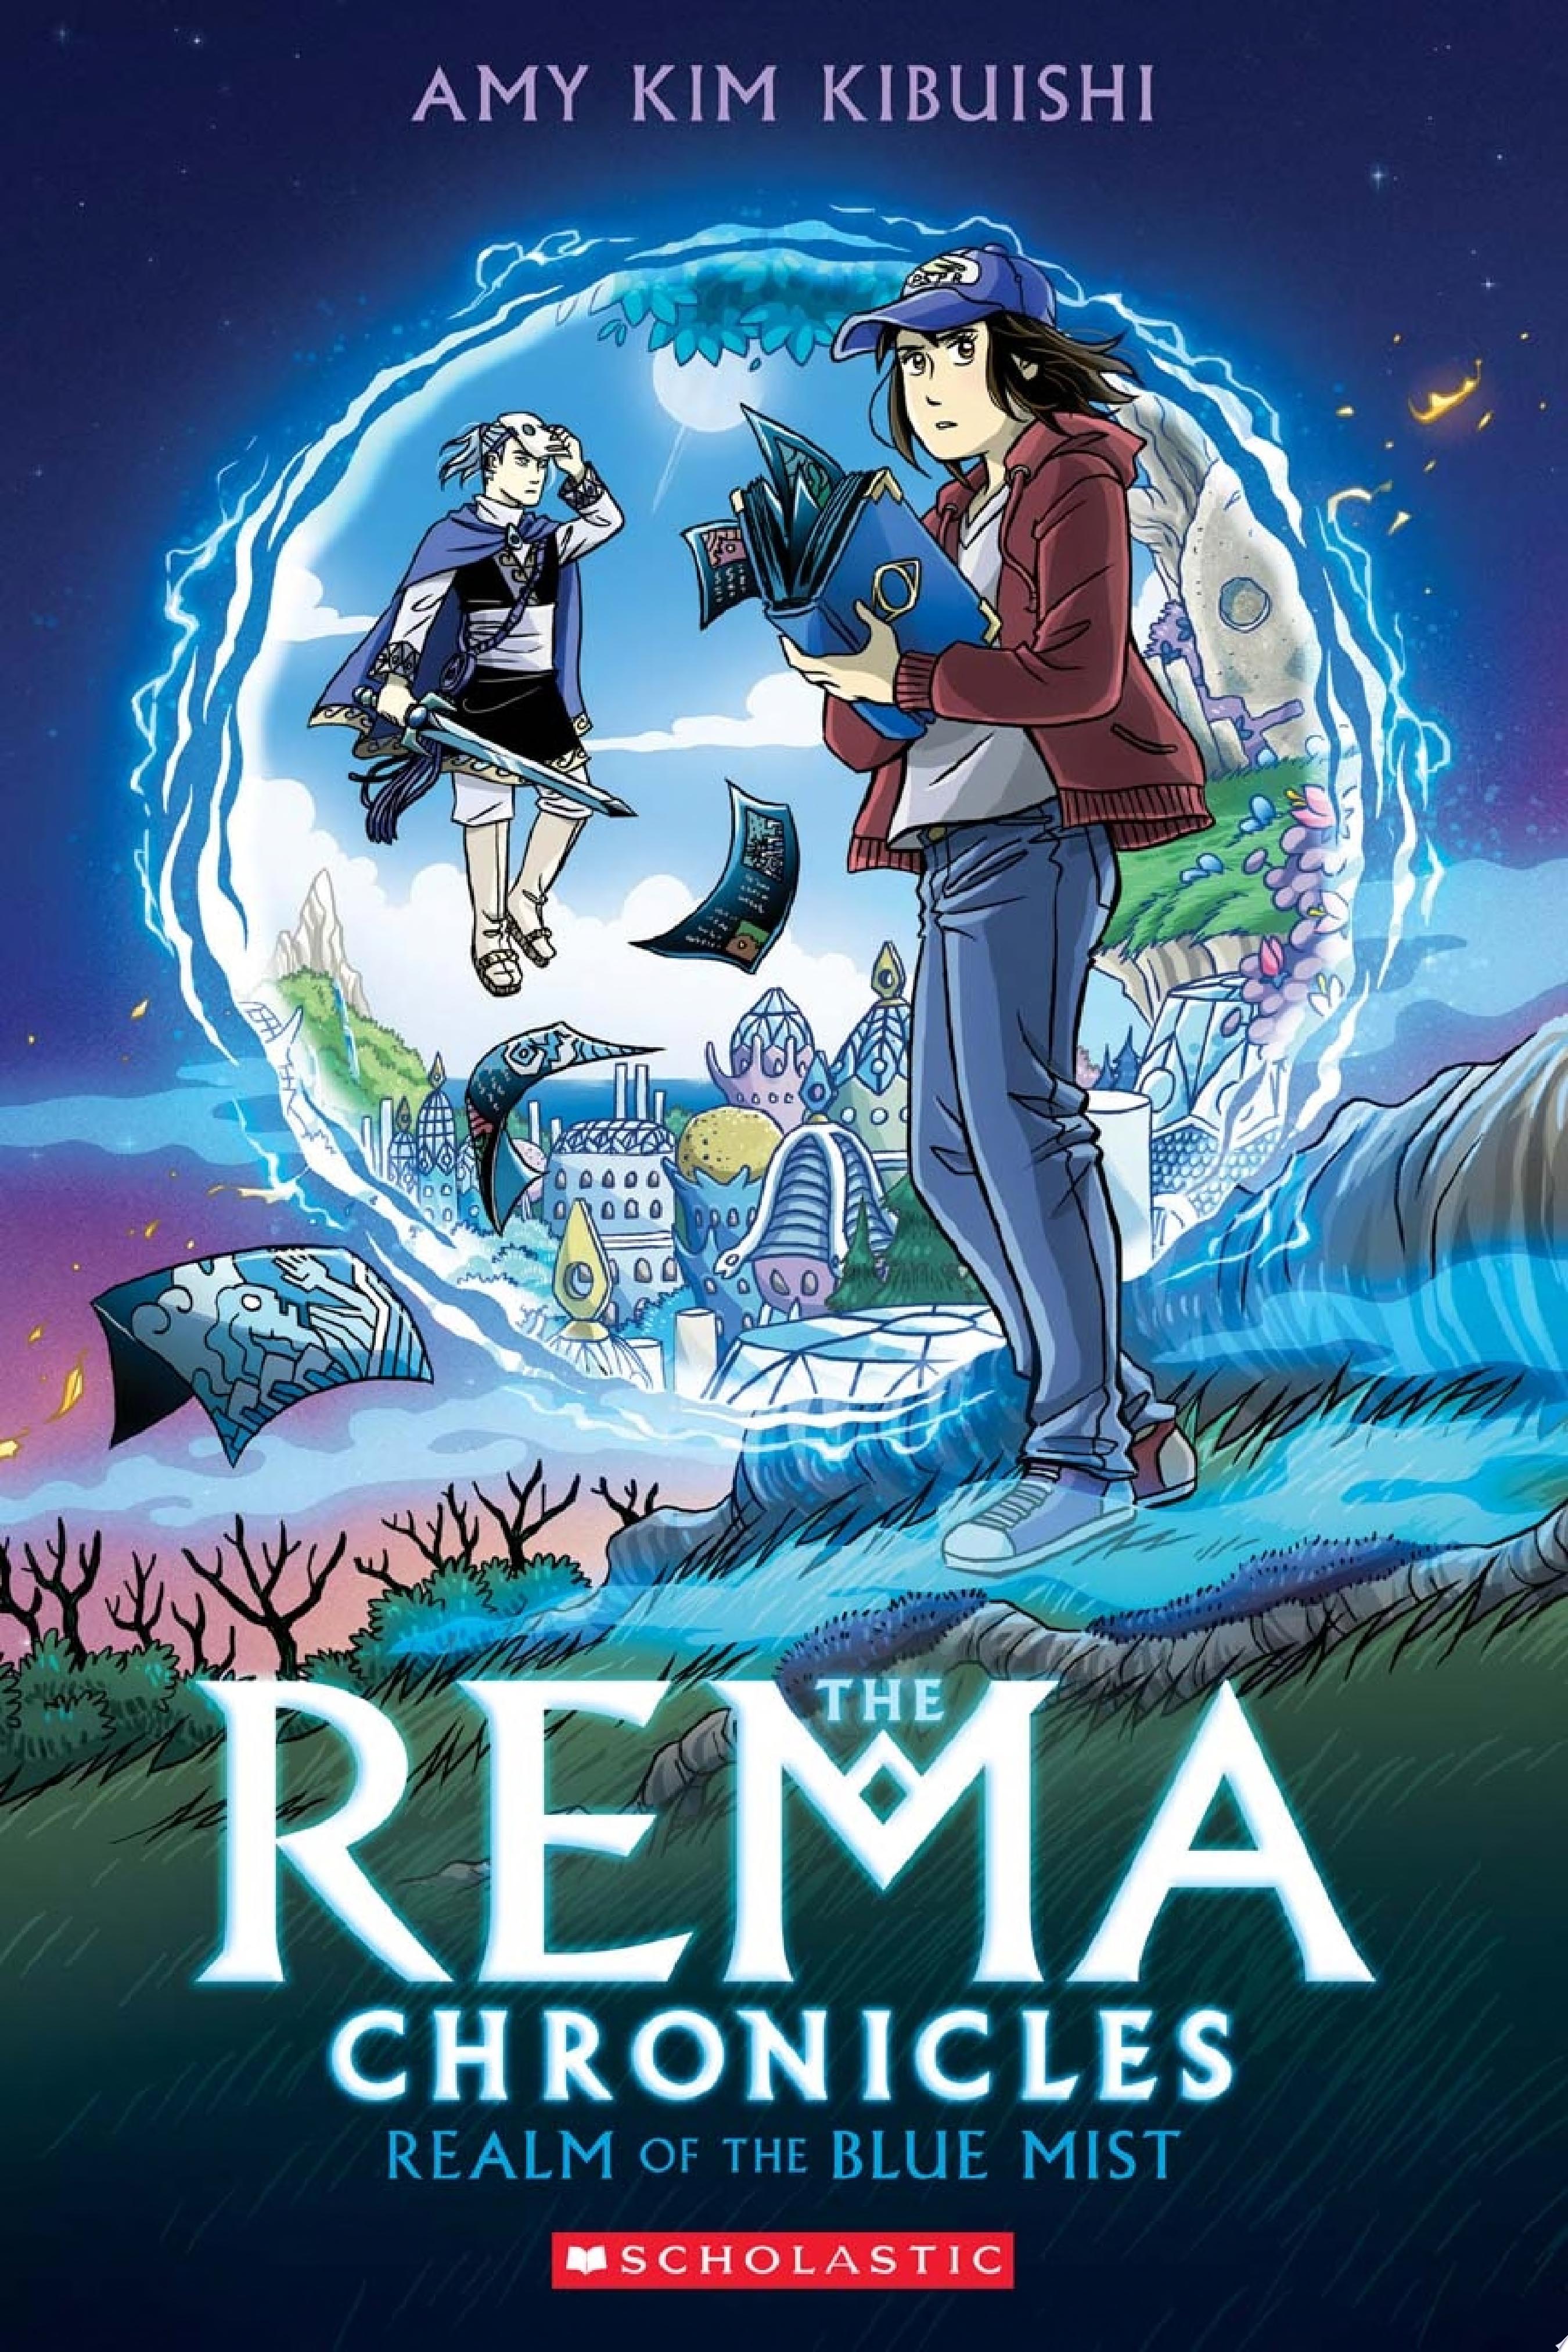 Image for "Realm of the Blue Mist: A Graphic Novel (The Rema Chronicles #1)"